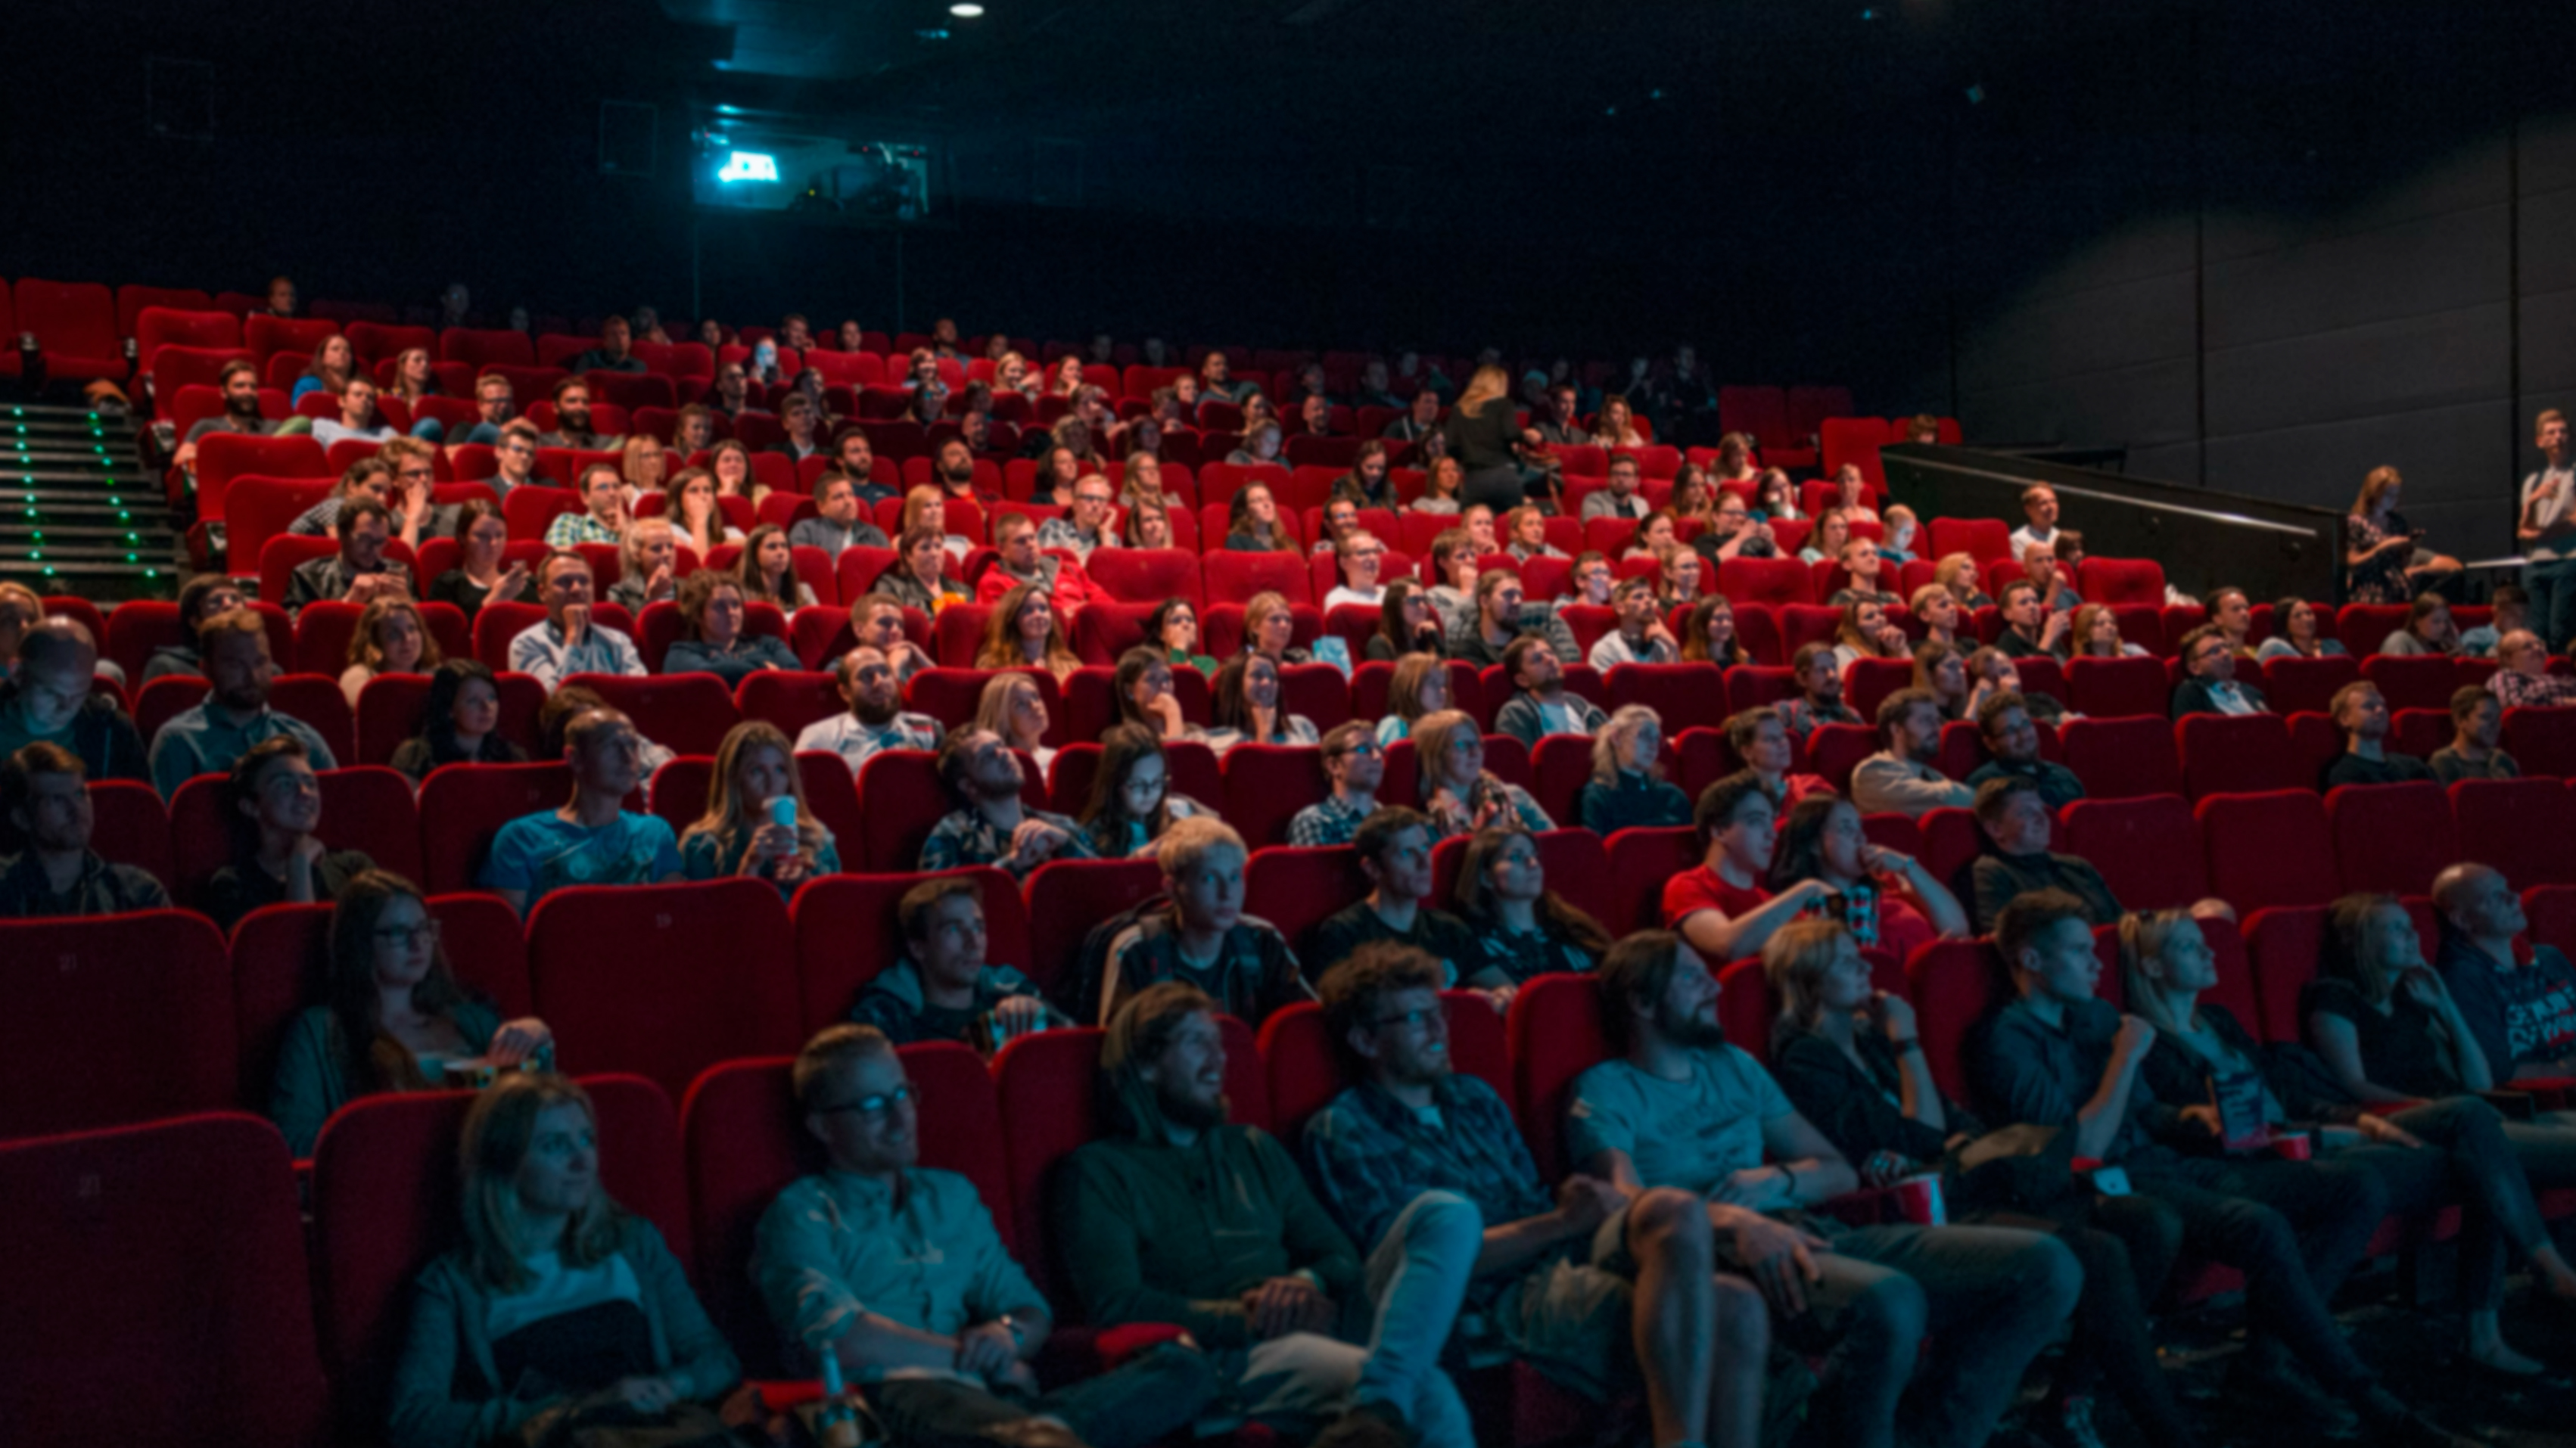 Organise a pre-screening of the educational film for your private audience before anyone else sees it and host a Q&A for your audience with our founder Nina Jørmeland. This reward also includes access to view the educational film Endometriosis Explained.